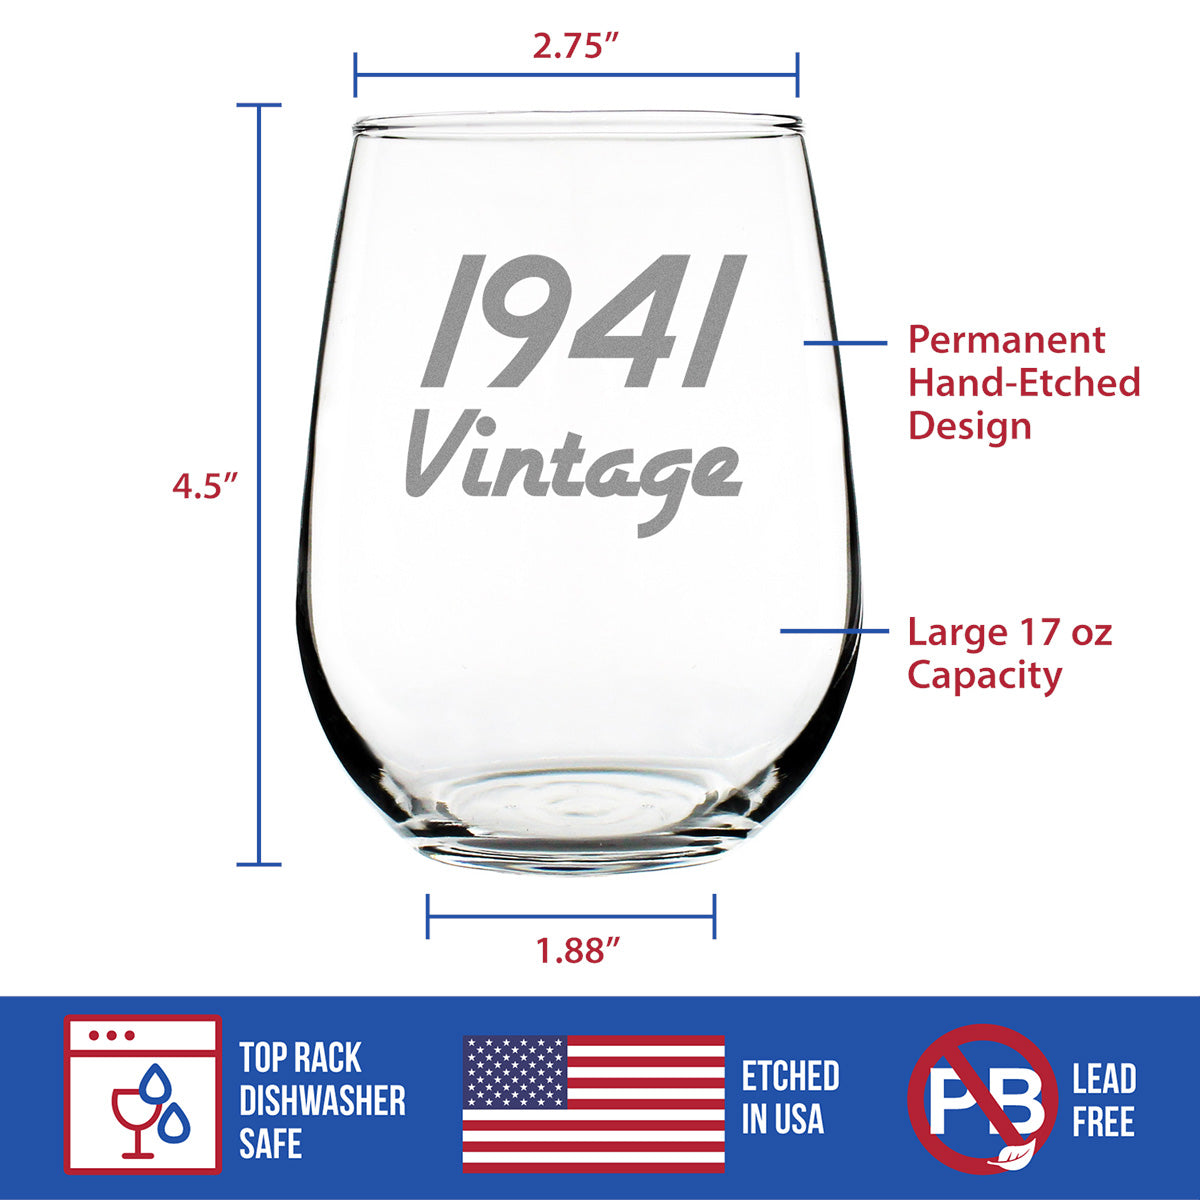 Vintage 1941-82nd Birthday Stemless Wine Glass Gifts for Women &amp; Men Turning 82 - Bday Party Decor - Large Glasses